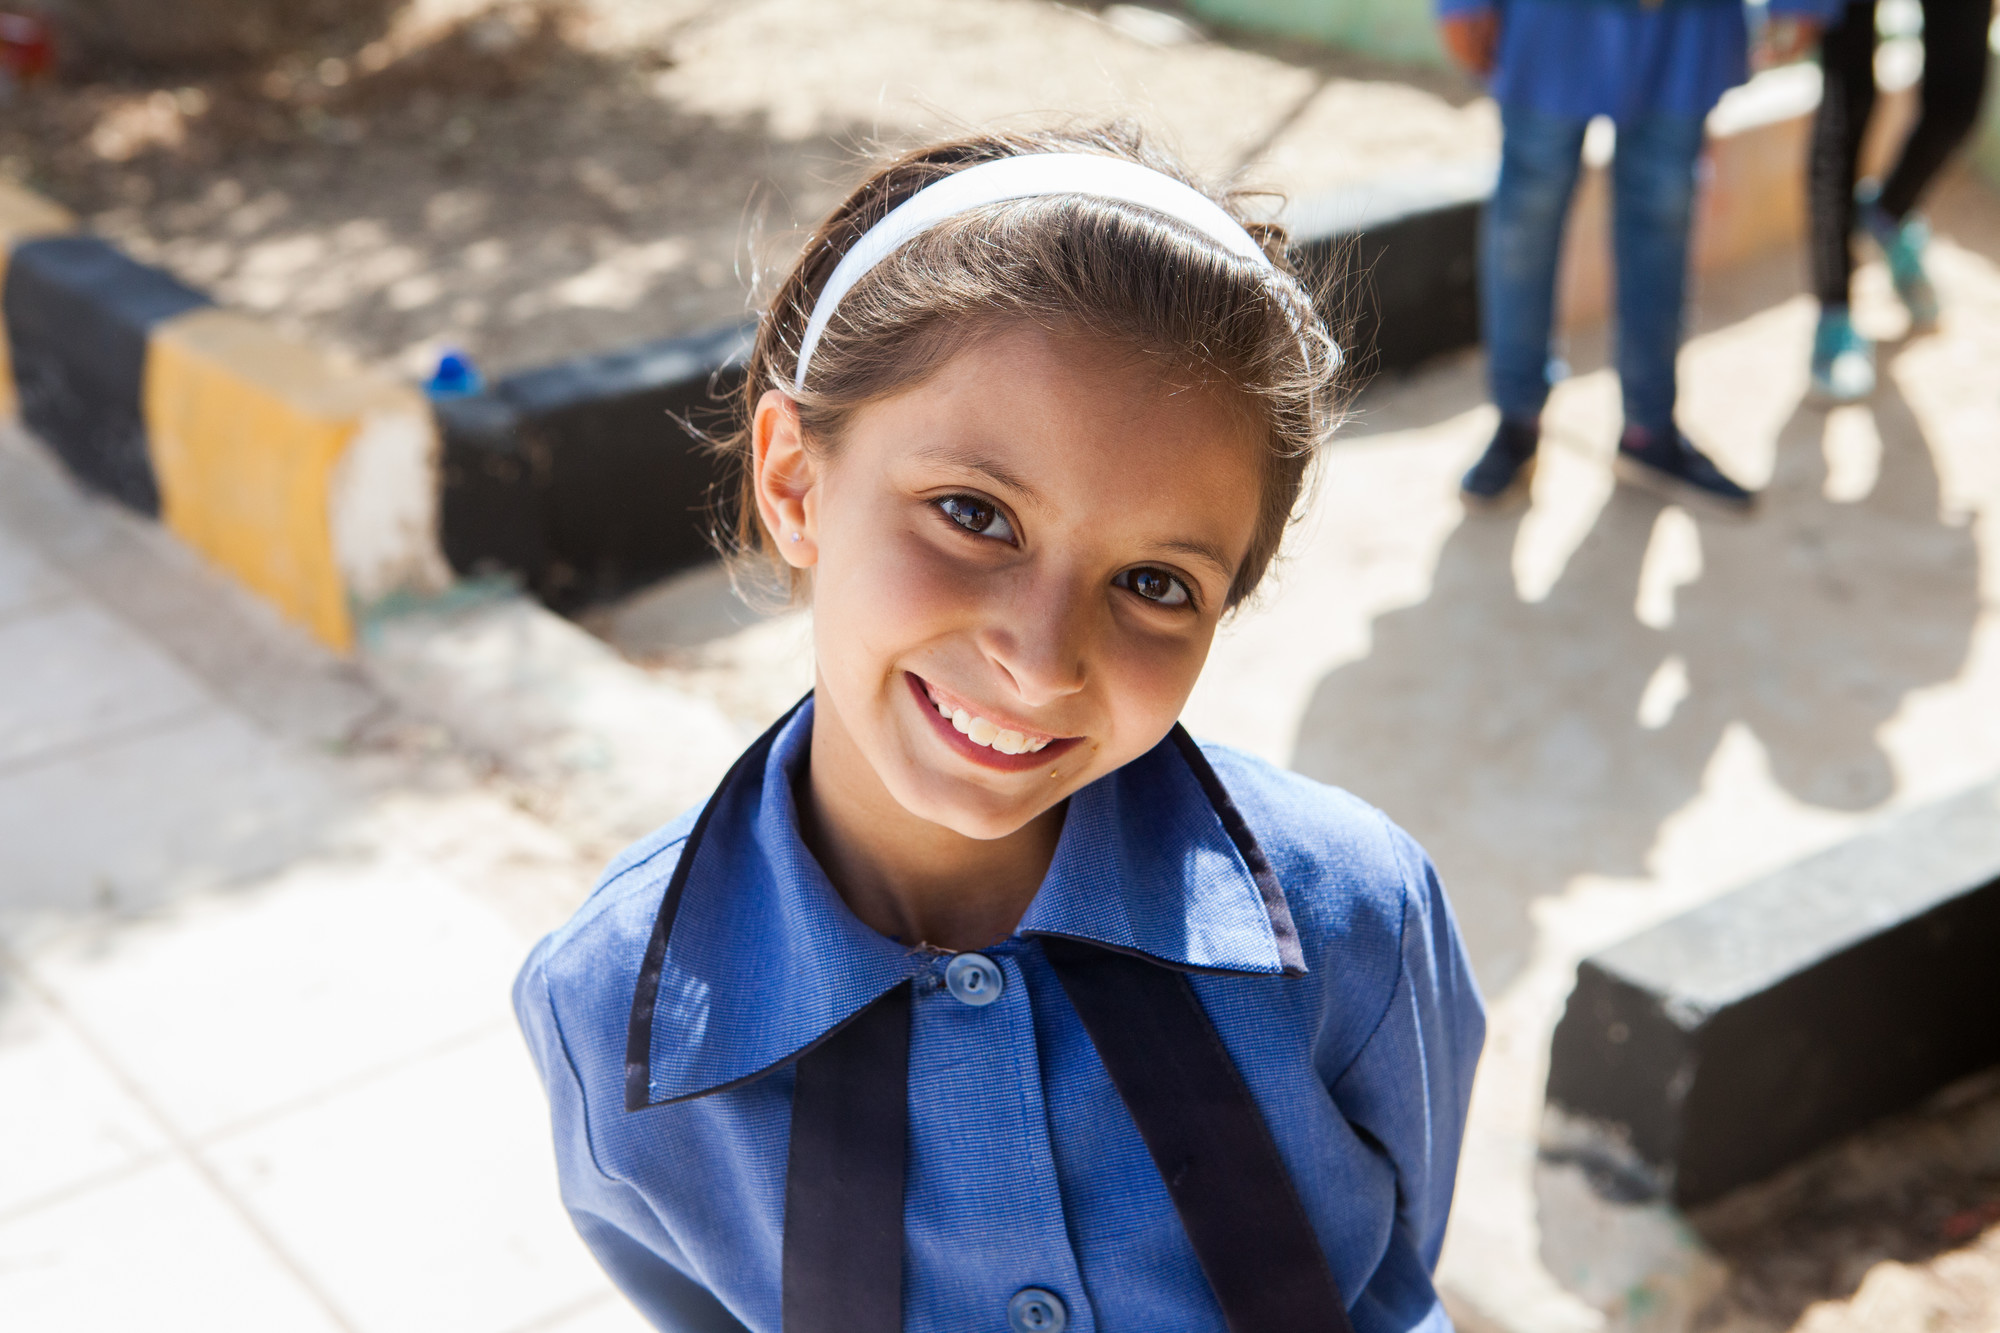 A girl in a blue school uniform smiles at the camera